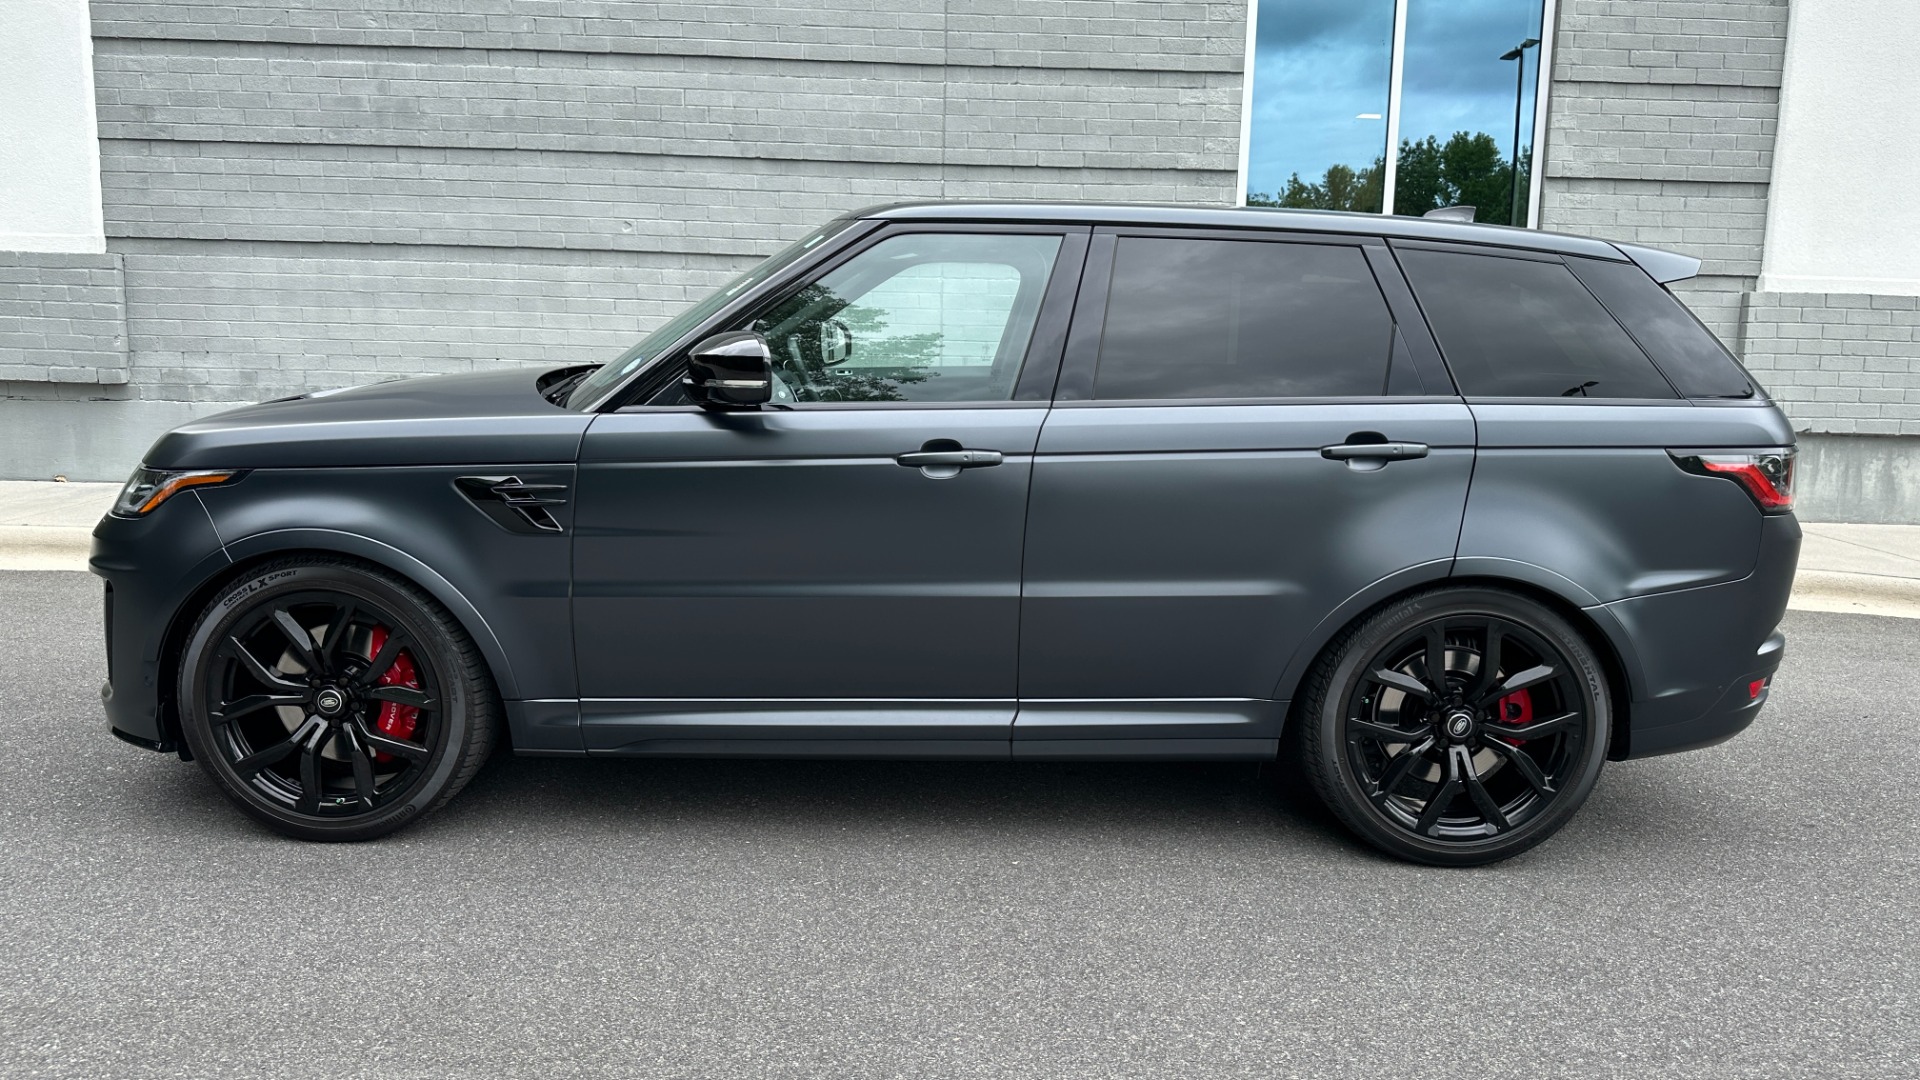 Used 2020 Land Rover Range Rover Sport SVR / SATIN SVO PAINT / DRIVE ASSIST / PREMIUM / TOW PACKAGE for sale $94,941 at Formula Imports in Charlotte NC 28227 3